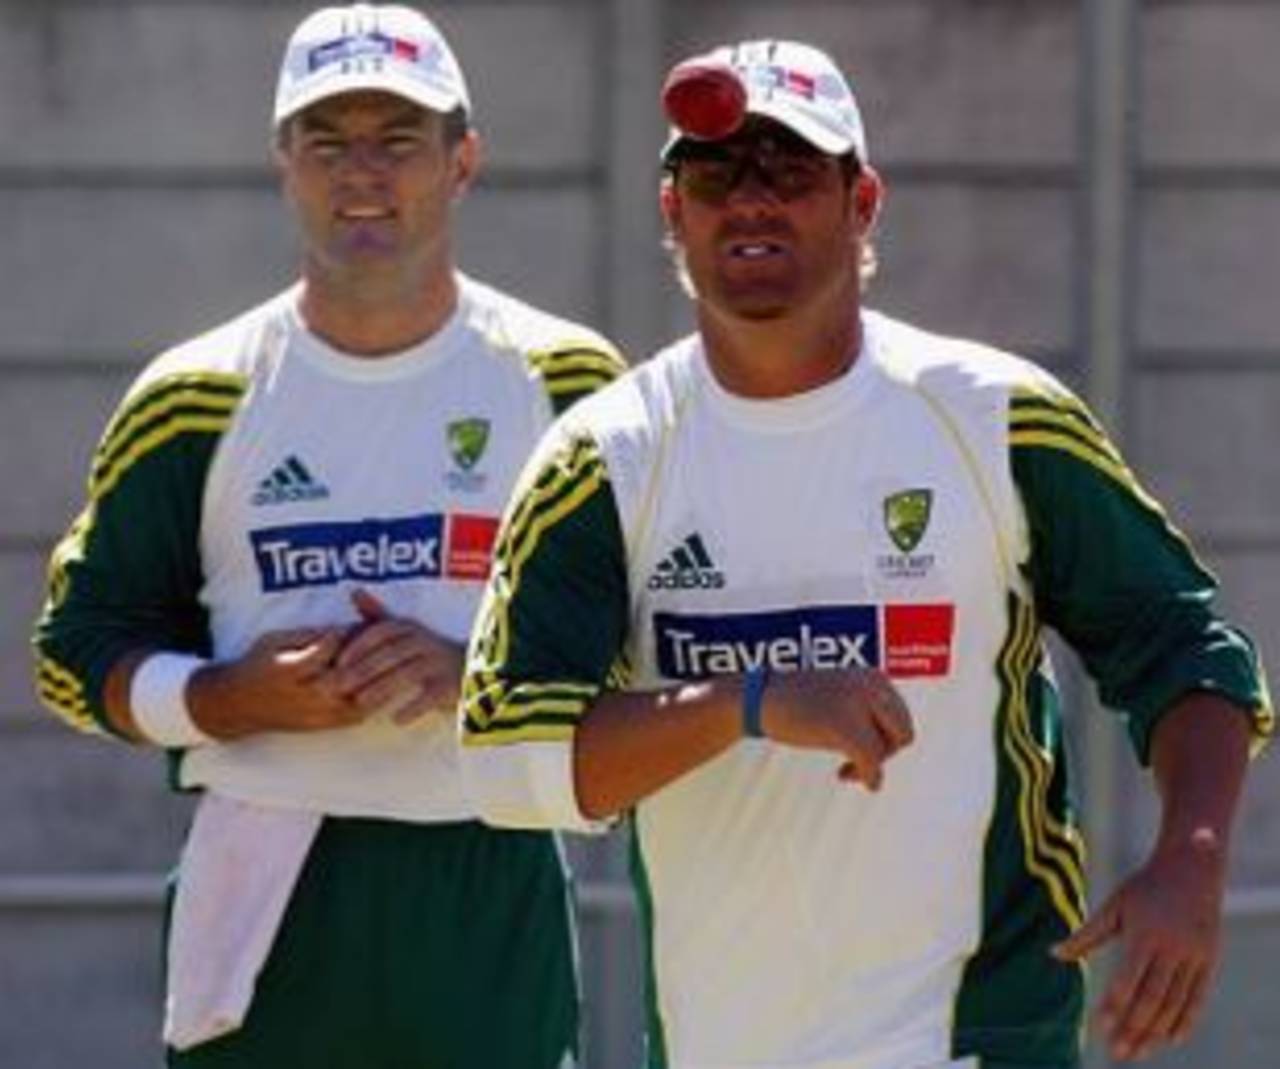 Spin twins: Shane Warne and Stuart MacGill at training. Australia are set to field both in the first Test against South Africa, Cape Town, March 14, 2006